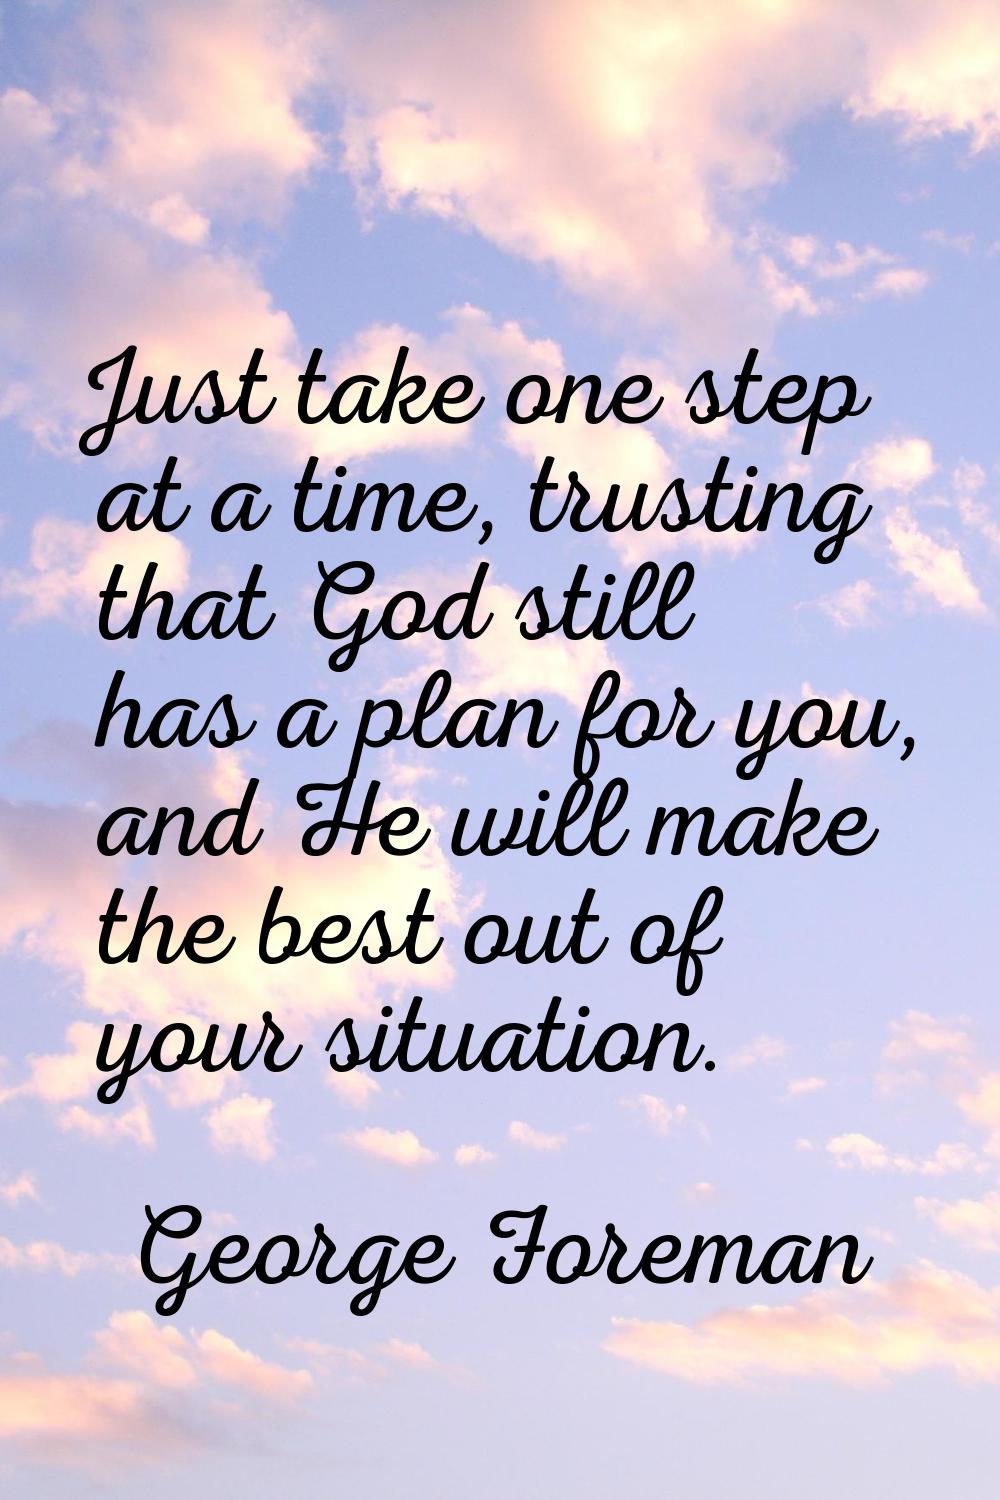 Just take one step at a time, trusting that God still has a plan for you, and He will make the best